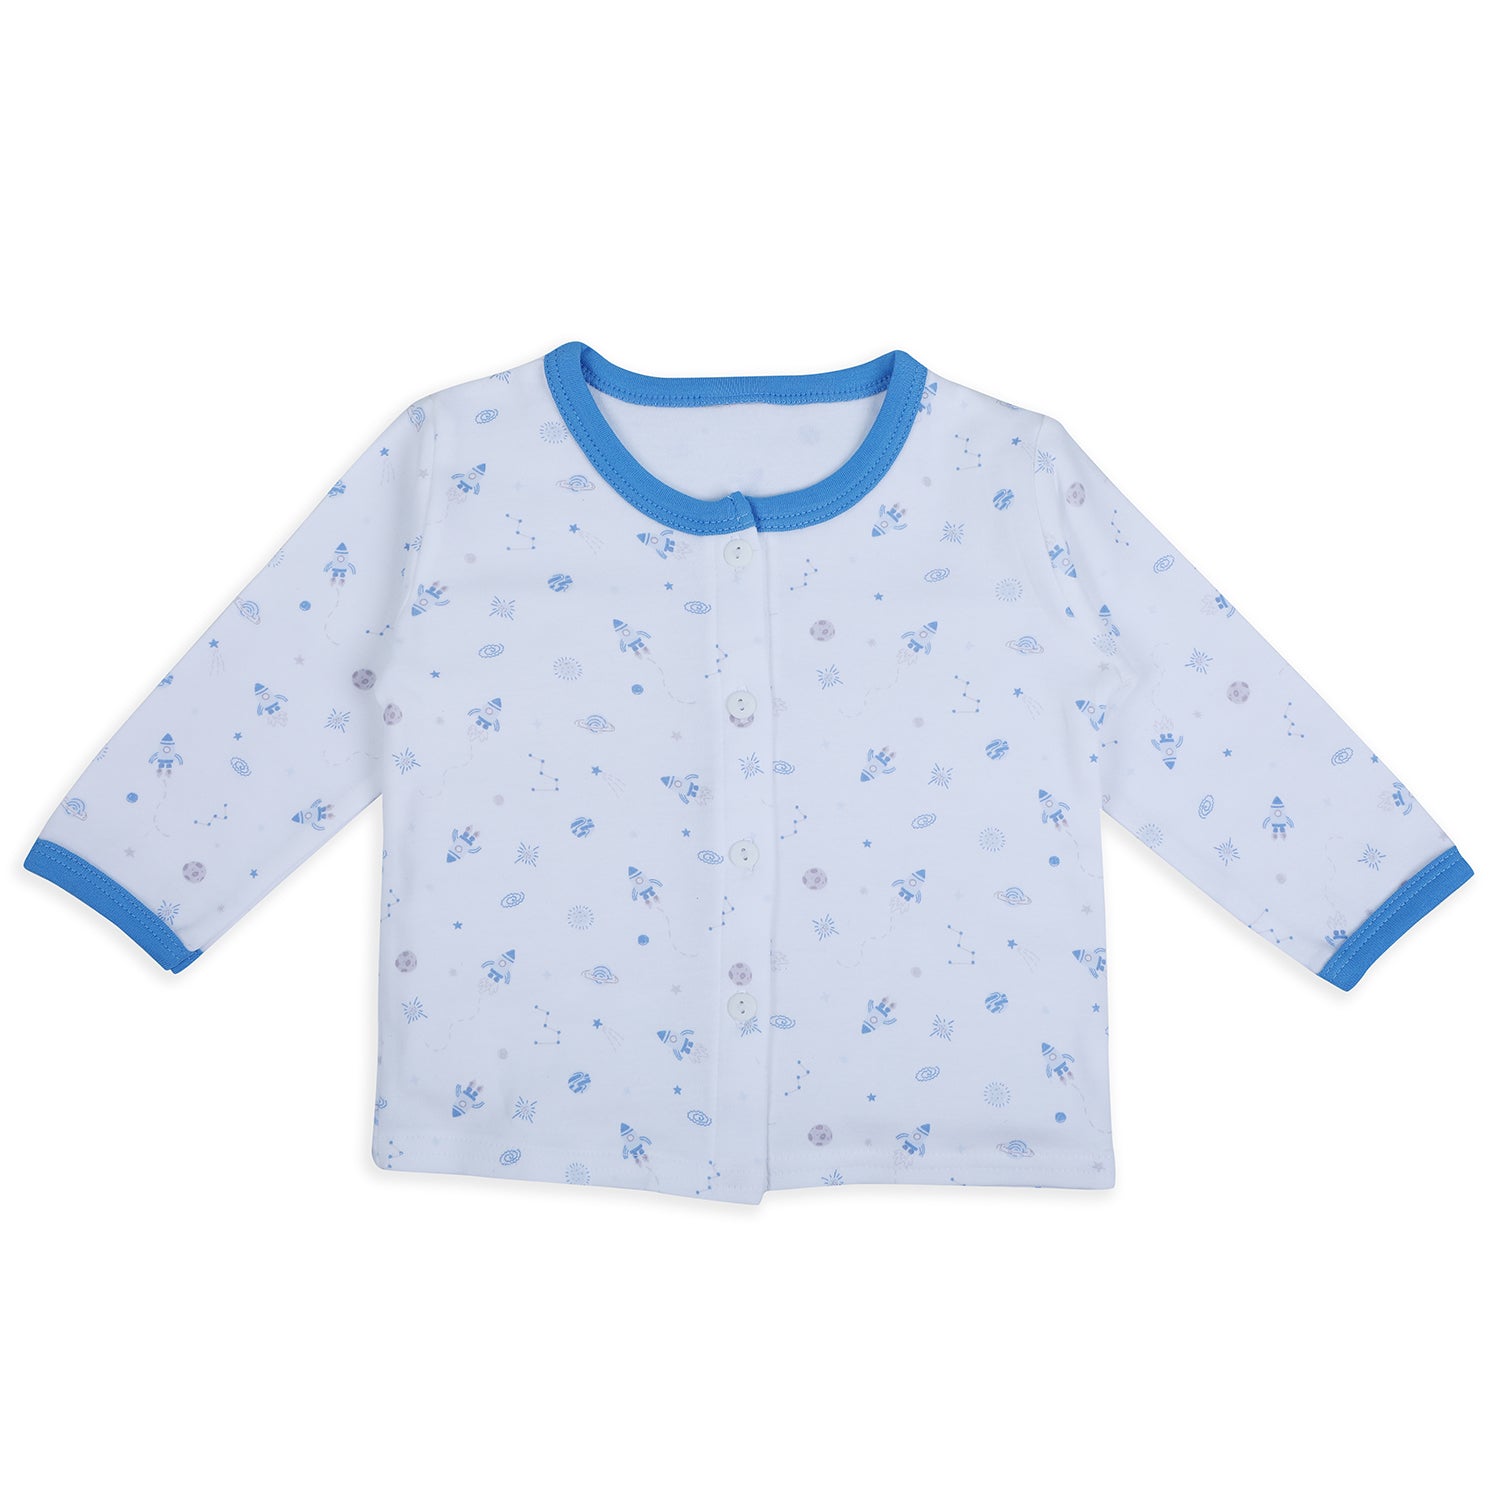 Baby Moo Space Mission Soft Cotton Full Sleeves Top And Pyjama 2pcs Night Suit - Blue - Baby Moo